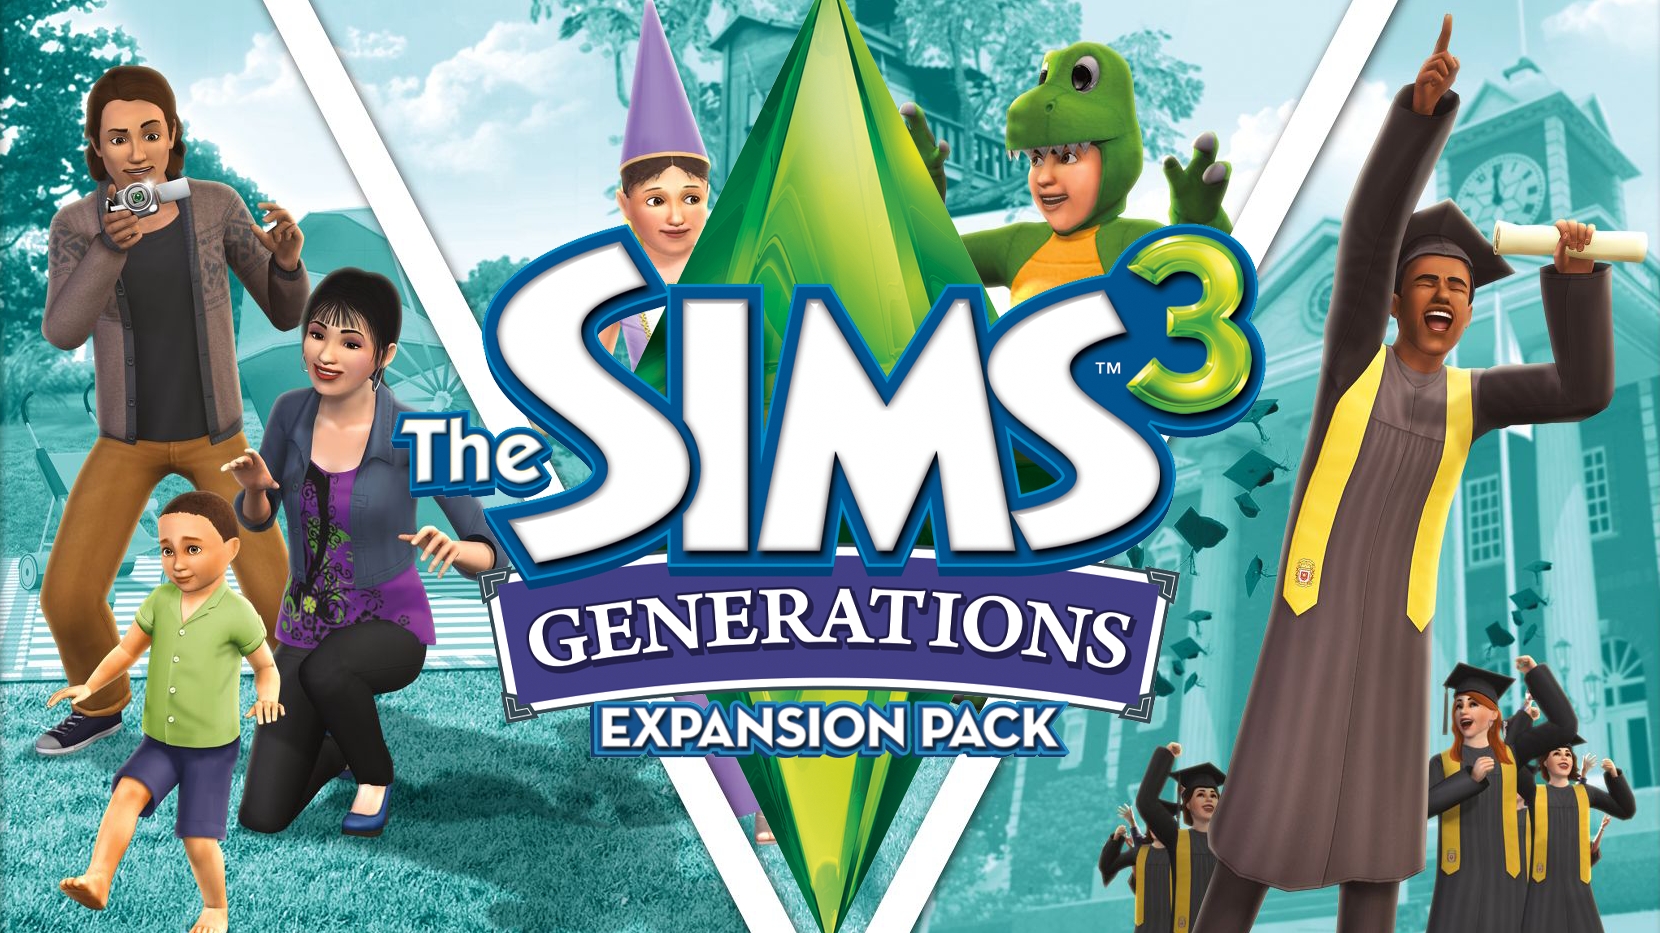 Free: Sims 3 Into The Future, Sims 3 Generations, Sims 3 Island